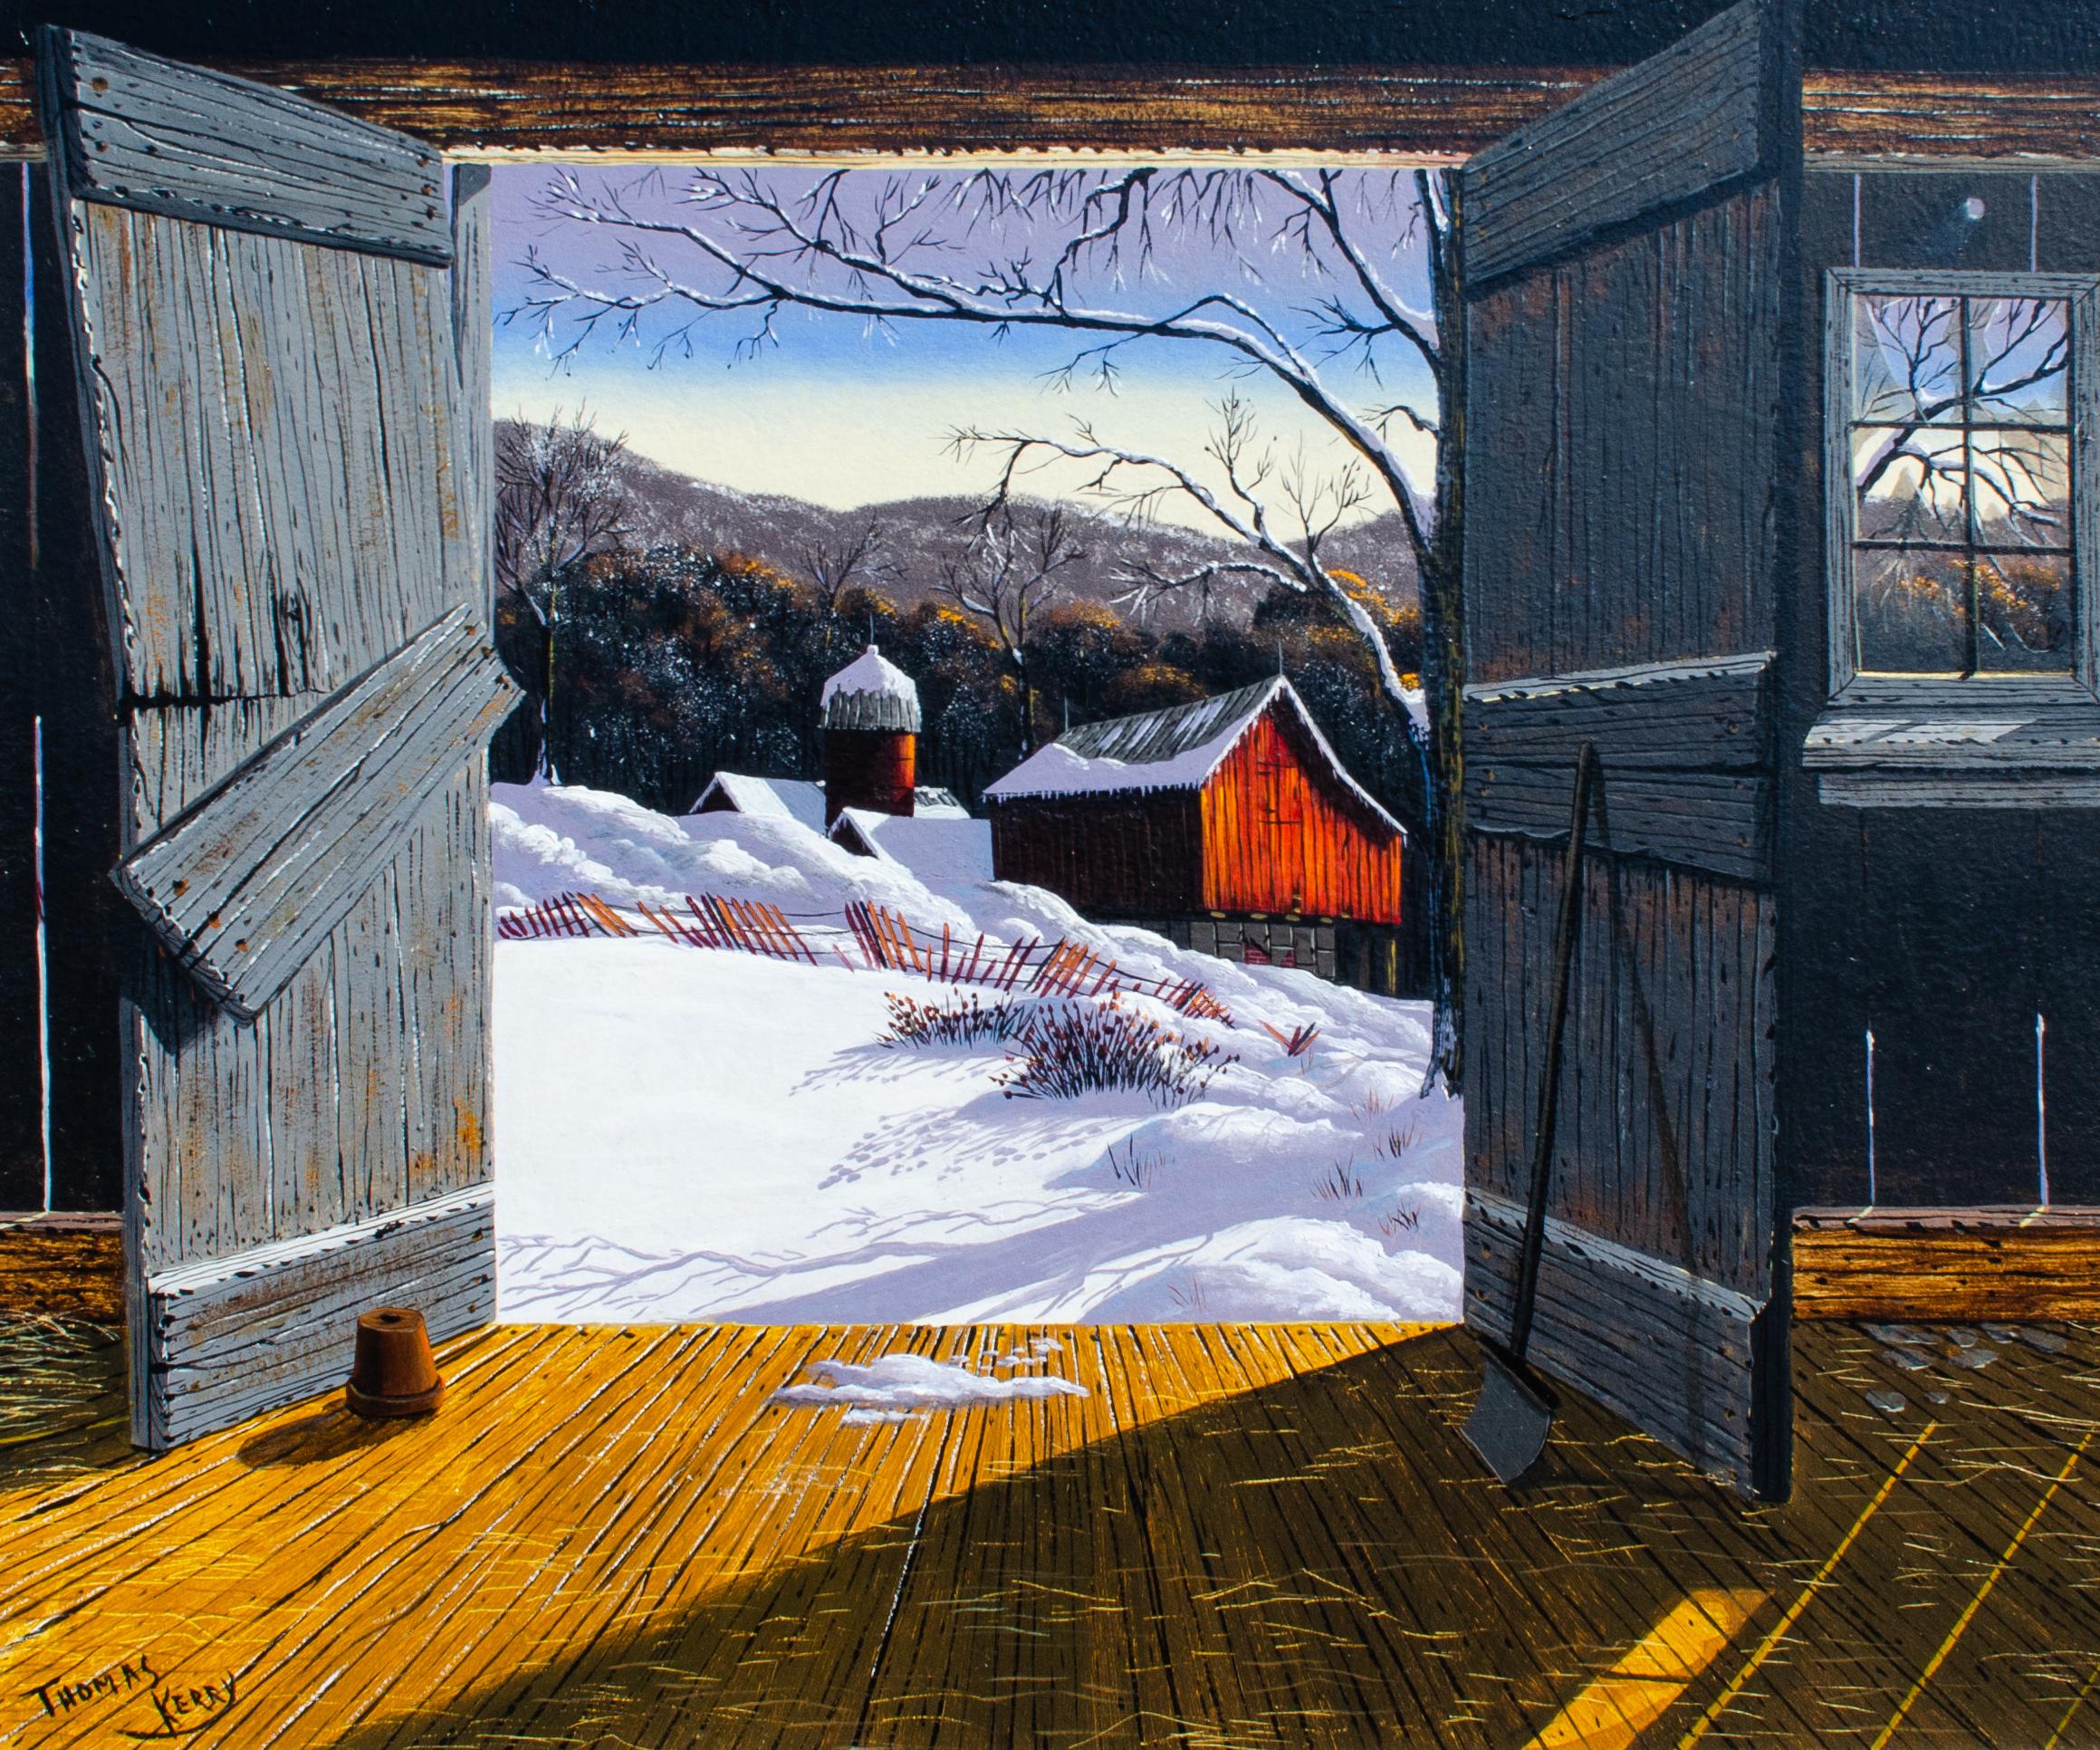 Thomas Kerry (American, 20th/21st century)
Untitled (Winter Barn), c. Early 21st Century
Oil on board
Sight: 19 x 23 in.
Framed: 23 3/4 x 27 3/4 x 1 1/2 in.
Signed lower left

Kerry called his art “as it was and is American Art”. He was born in